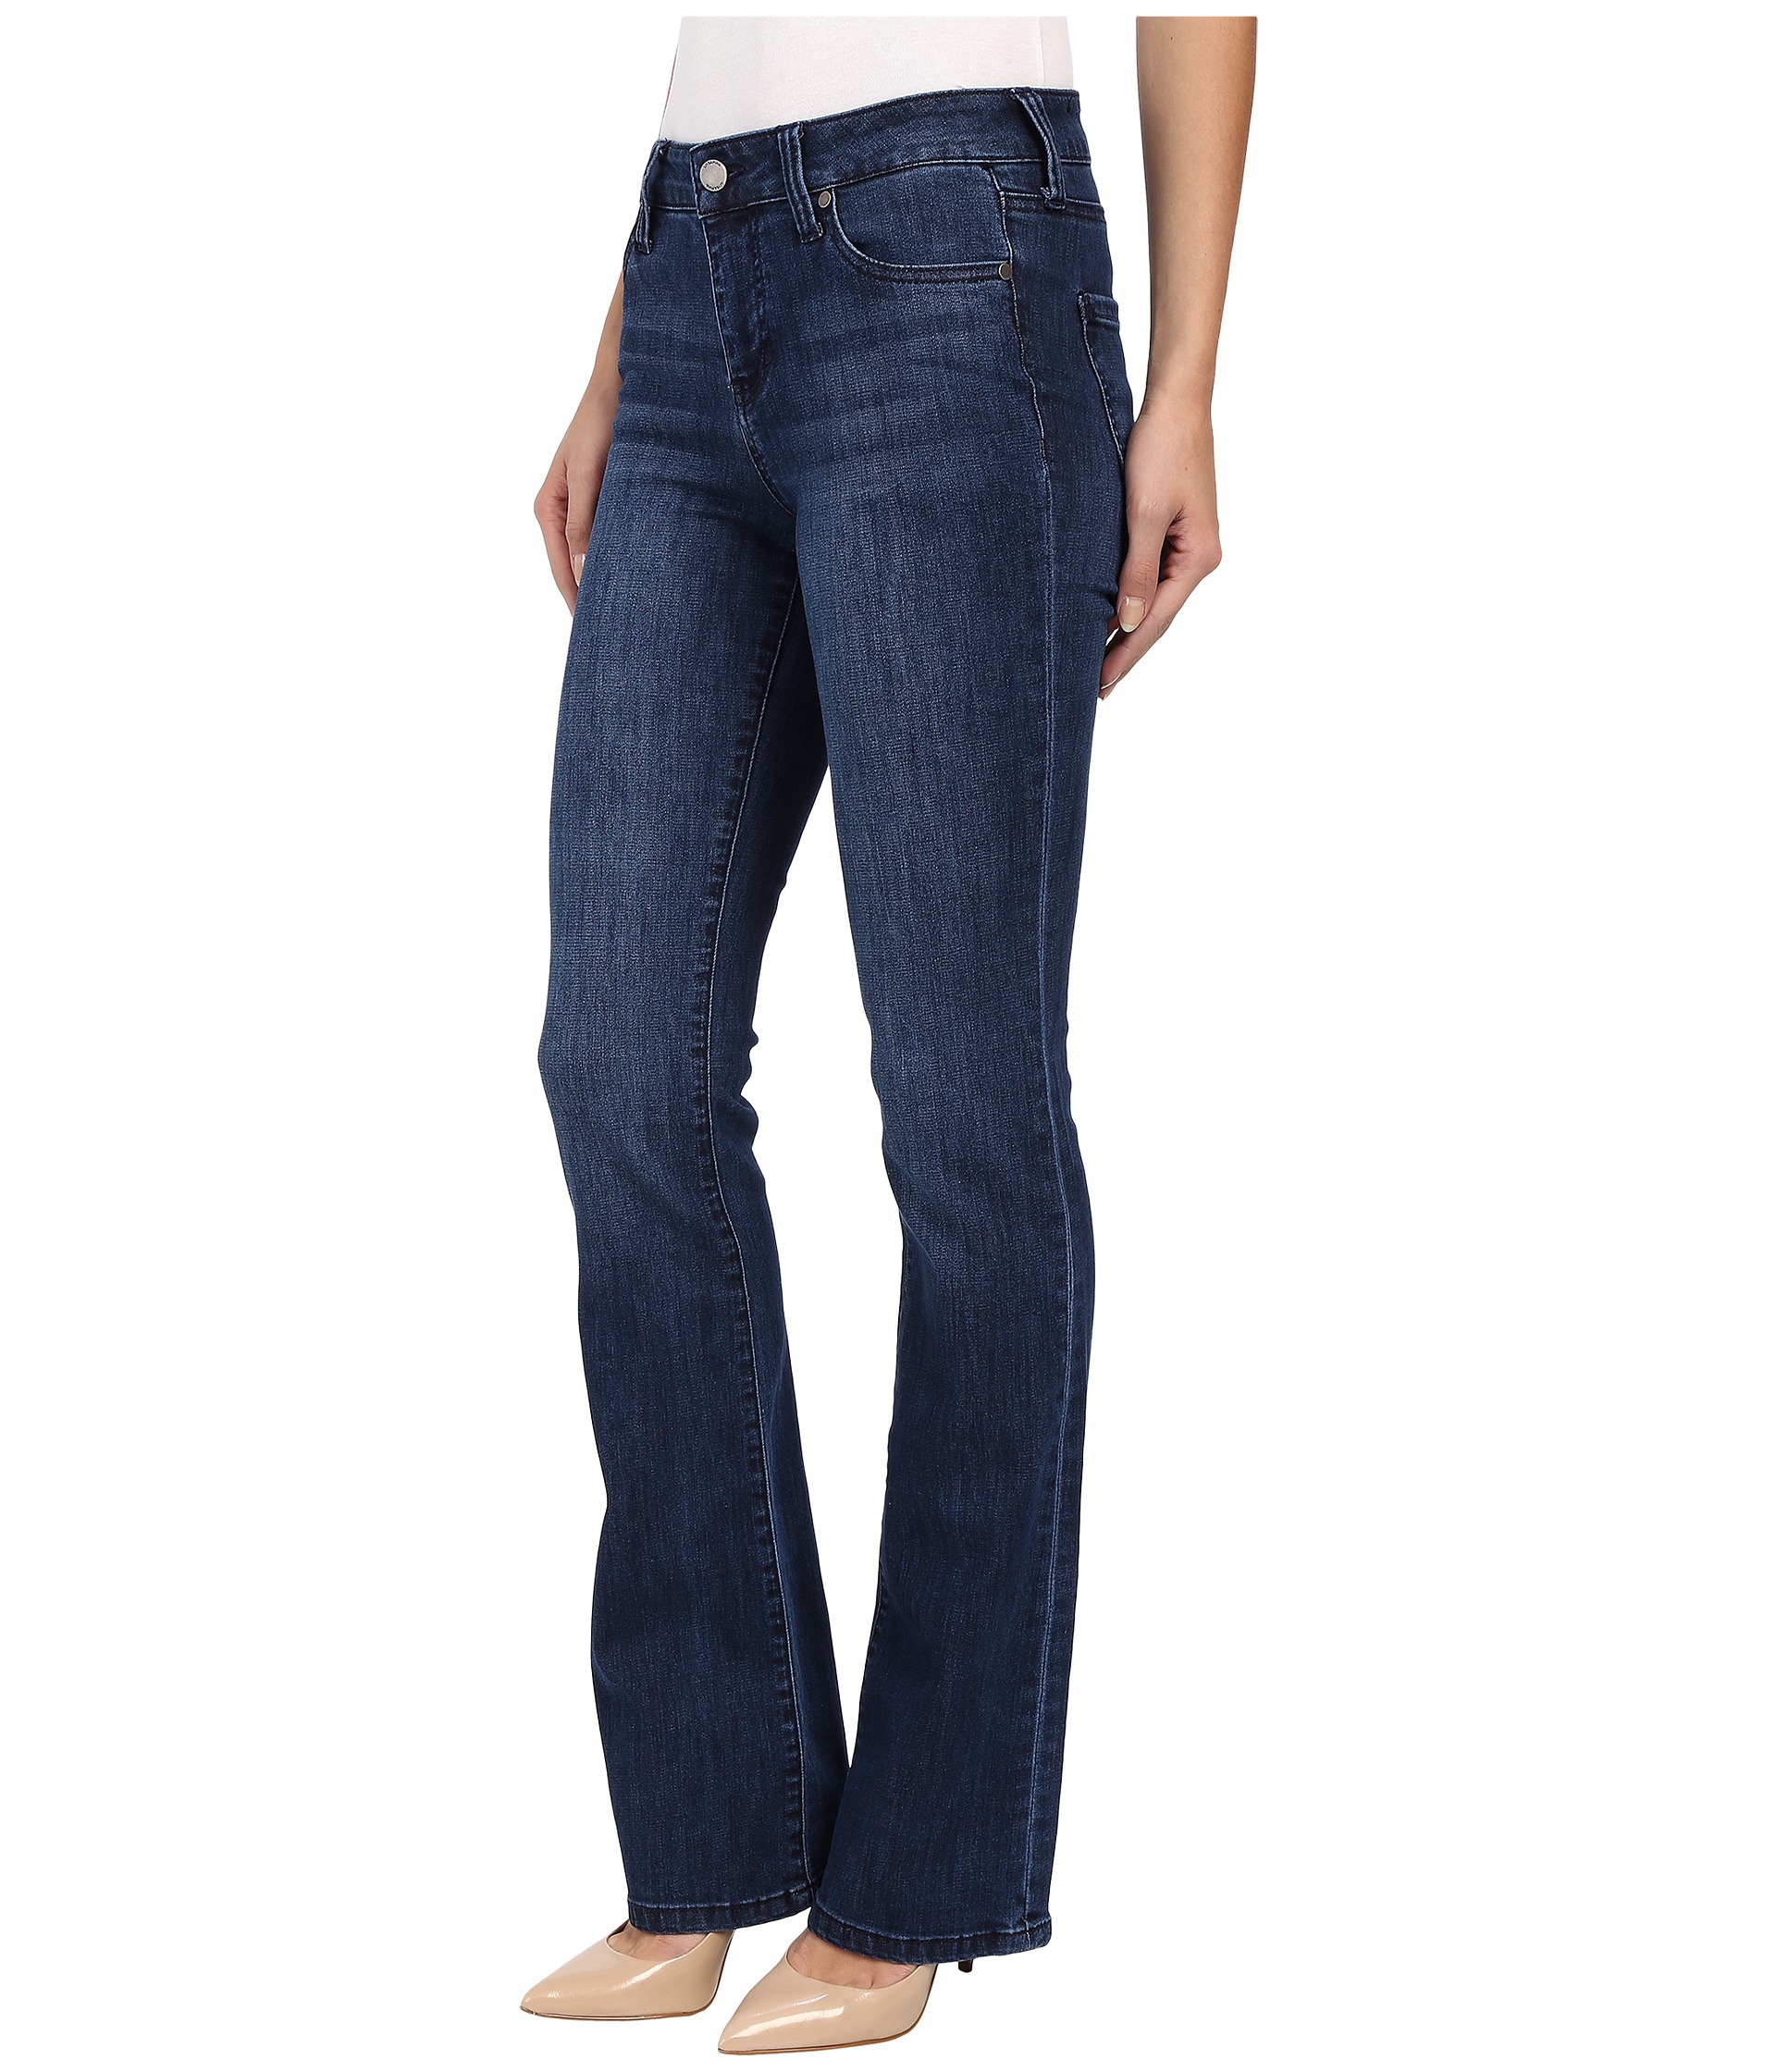 Liverpool Lucy Bootcut Jeans in Montauk Mid Blue at Zappos.com